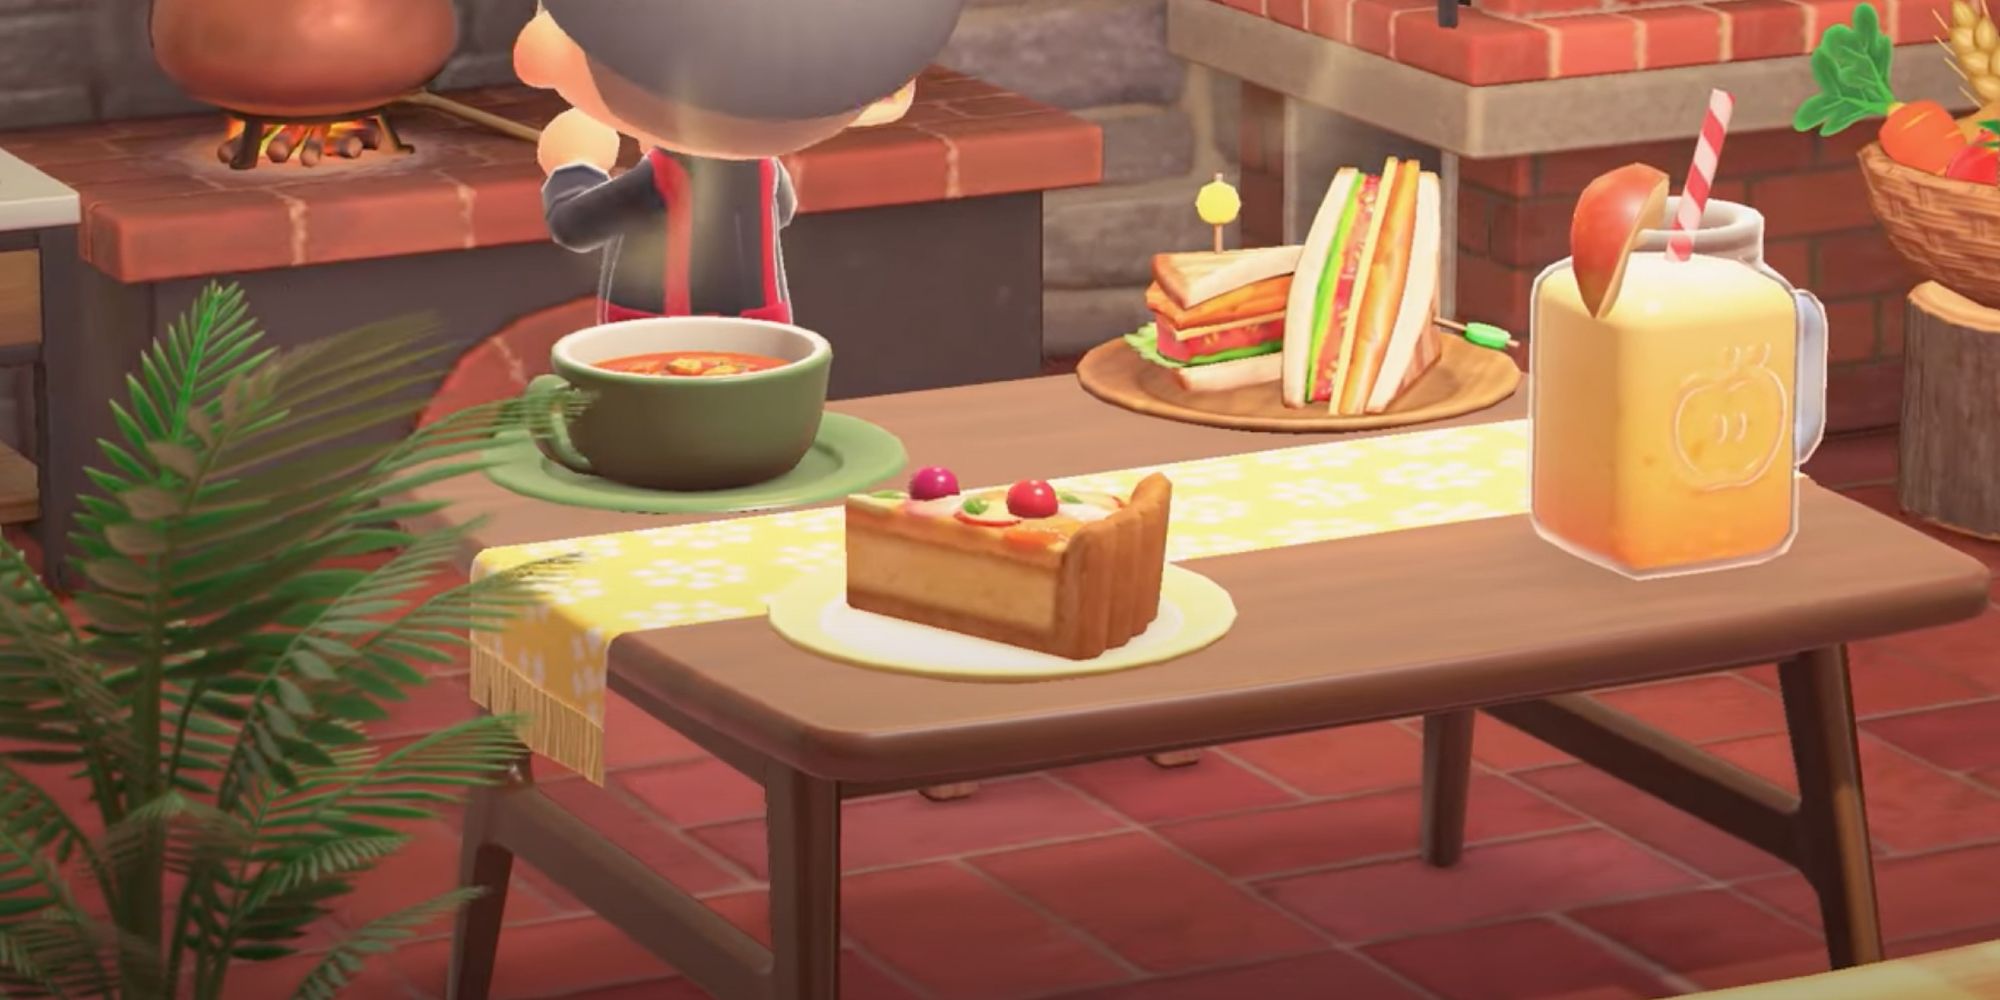 Animal Crossing's new crops can be made into dishes